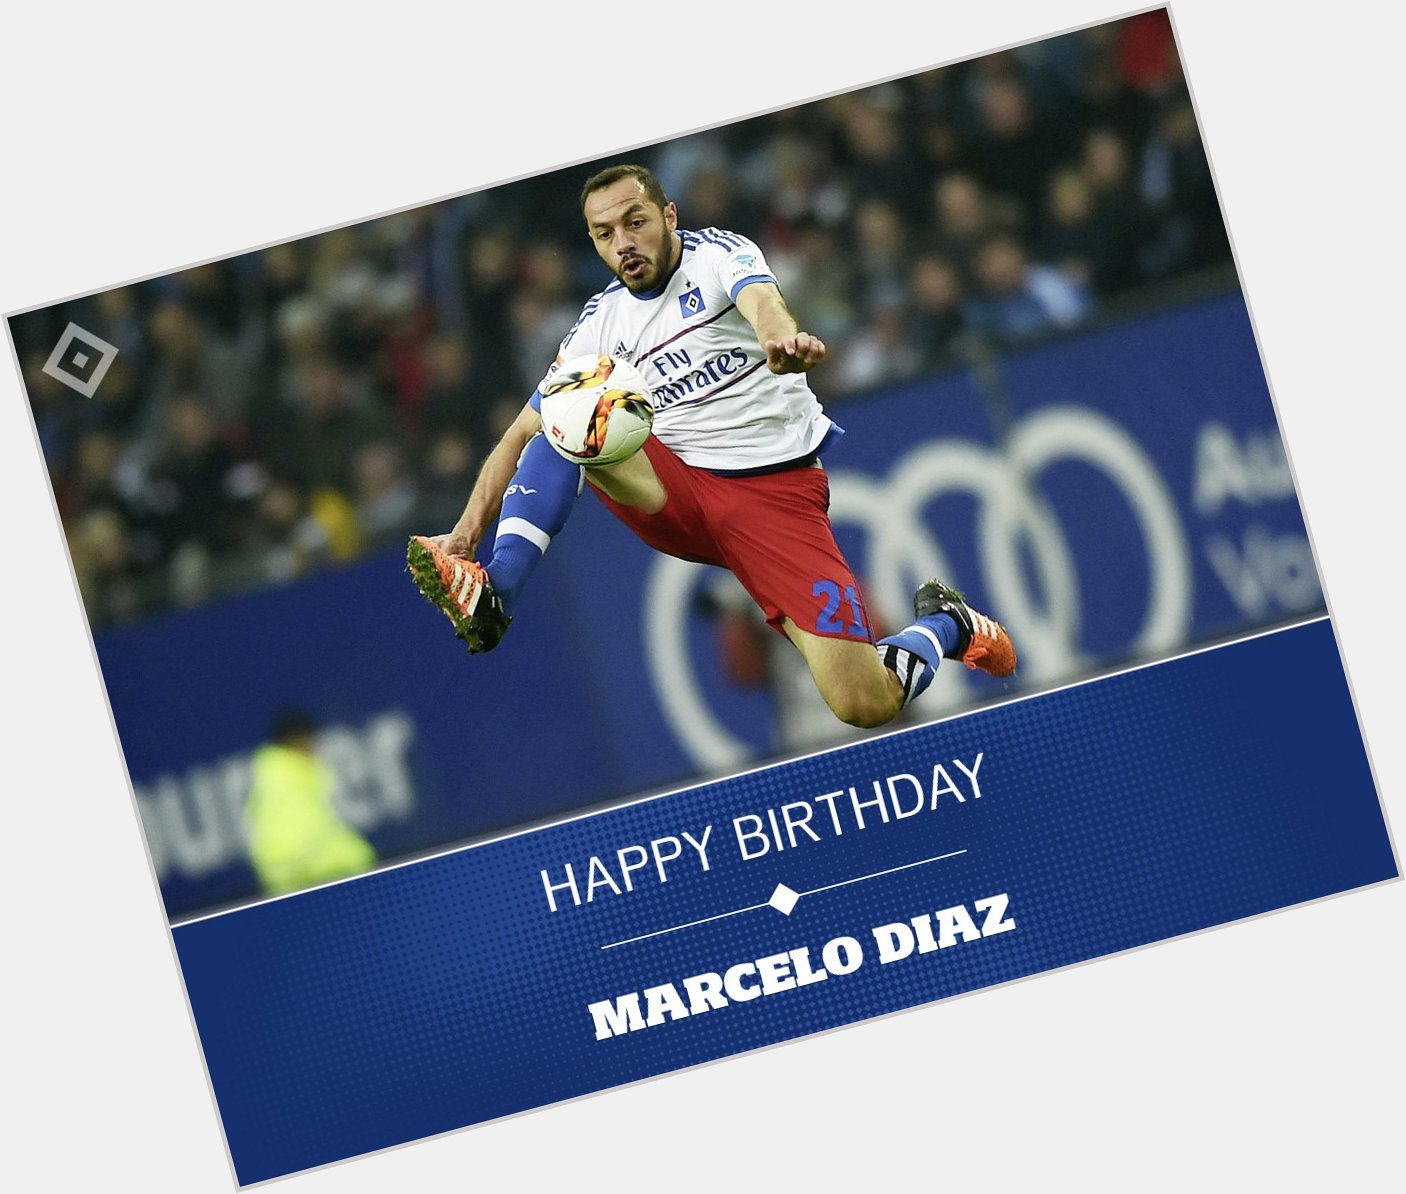 Happy birthday to Marcelo Diaz, who is celebrating his 33rd birthday today   